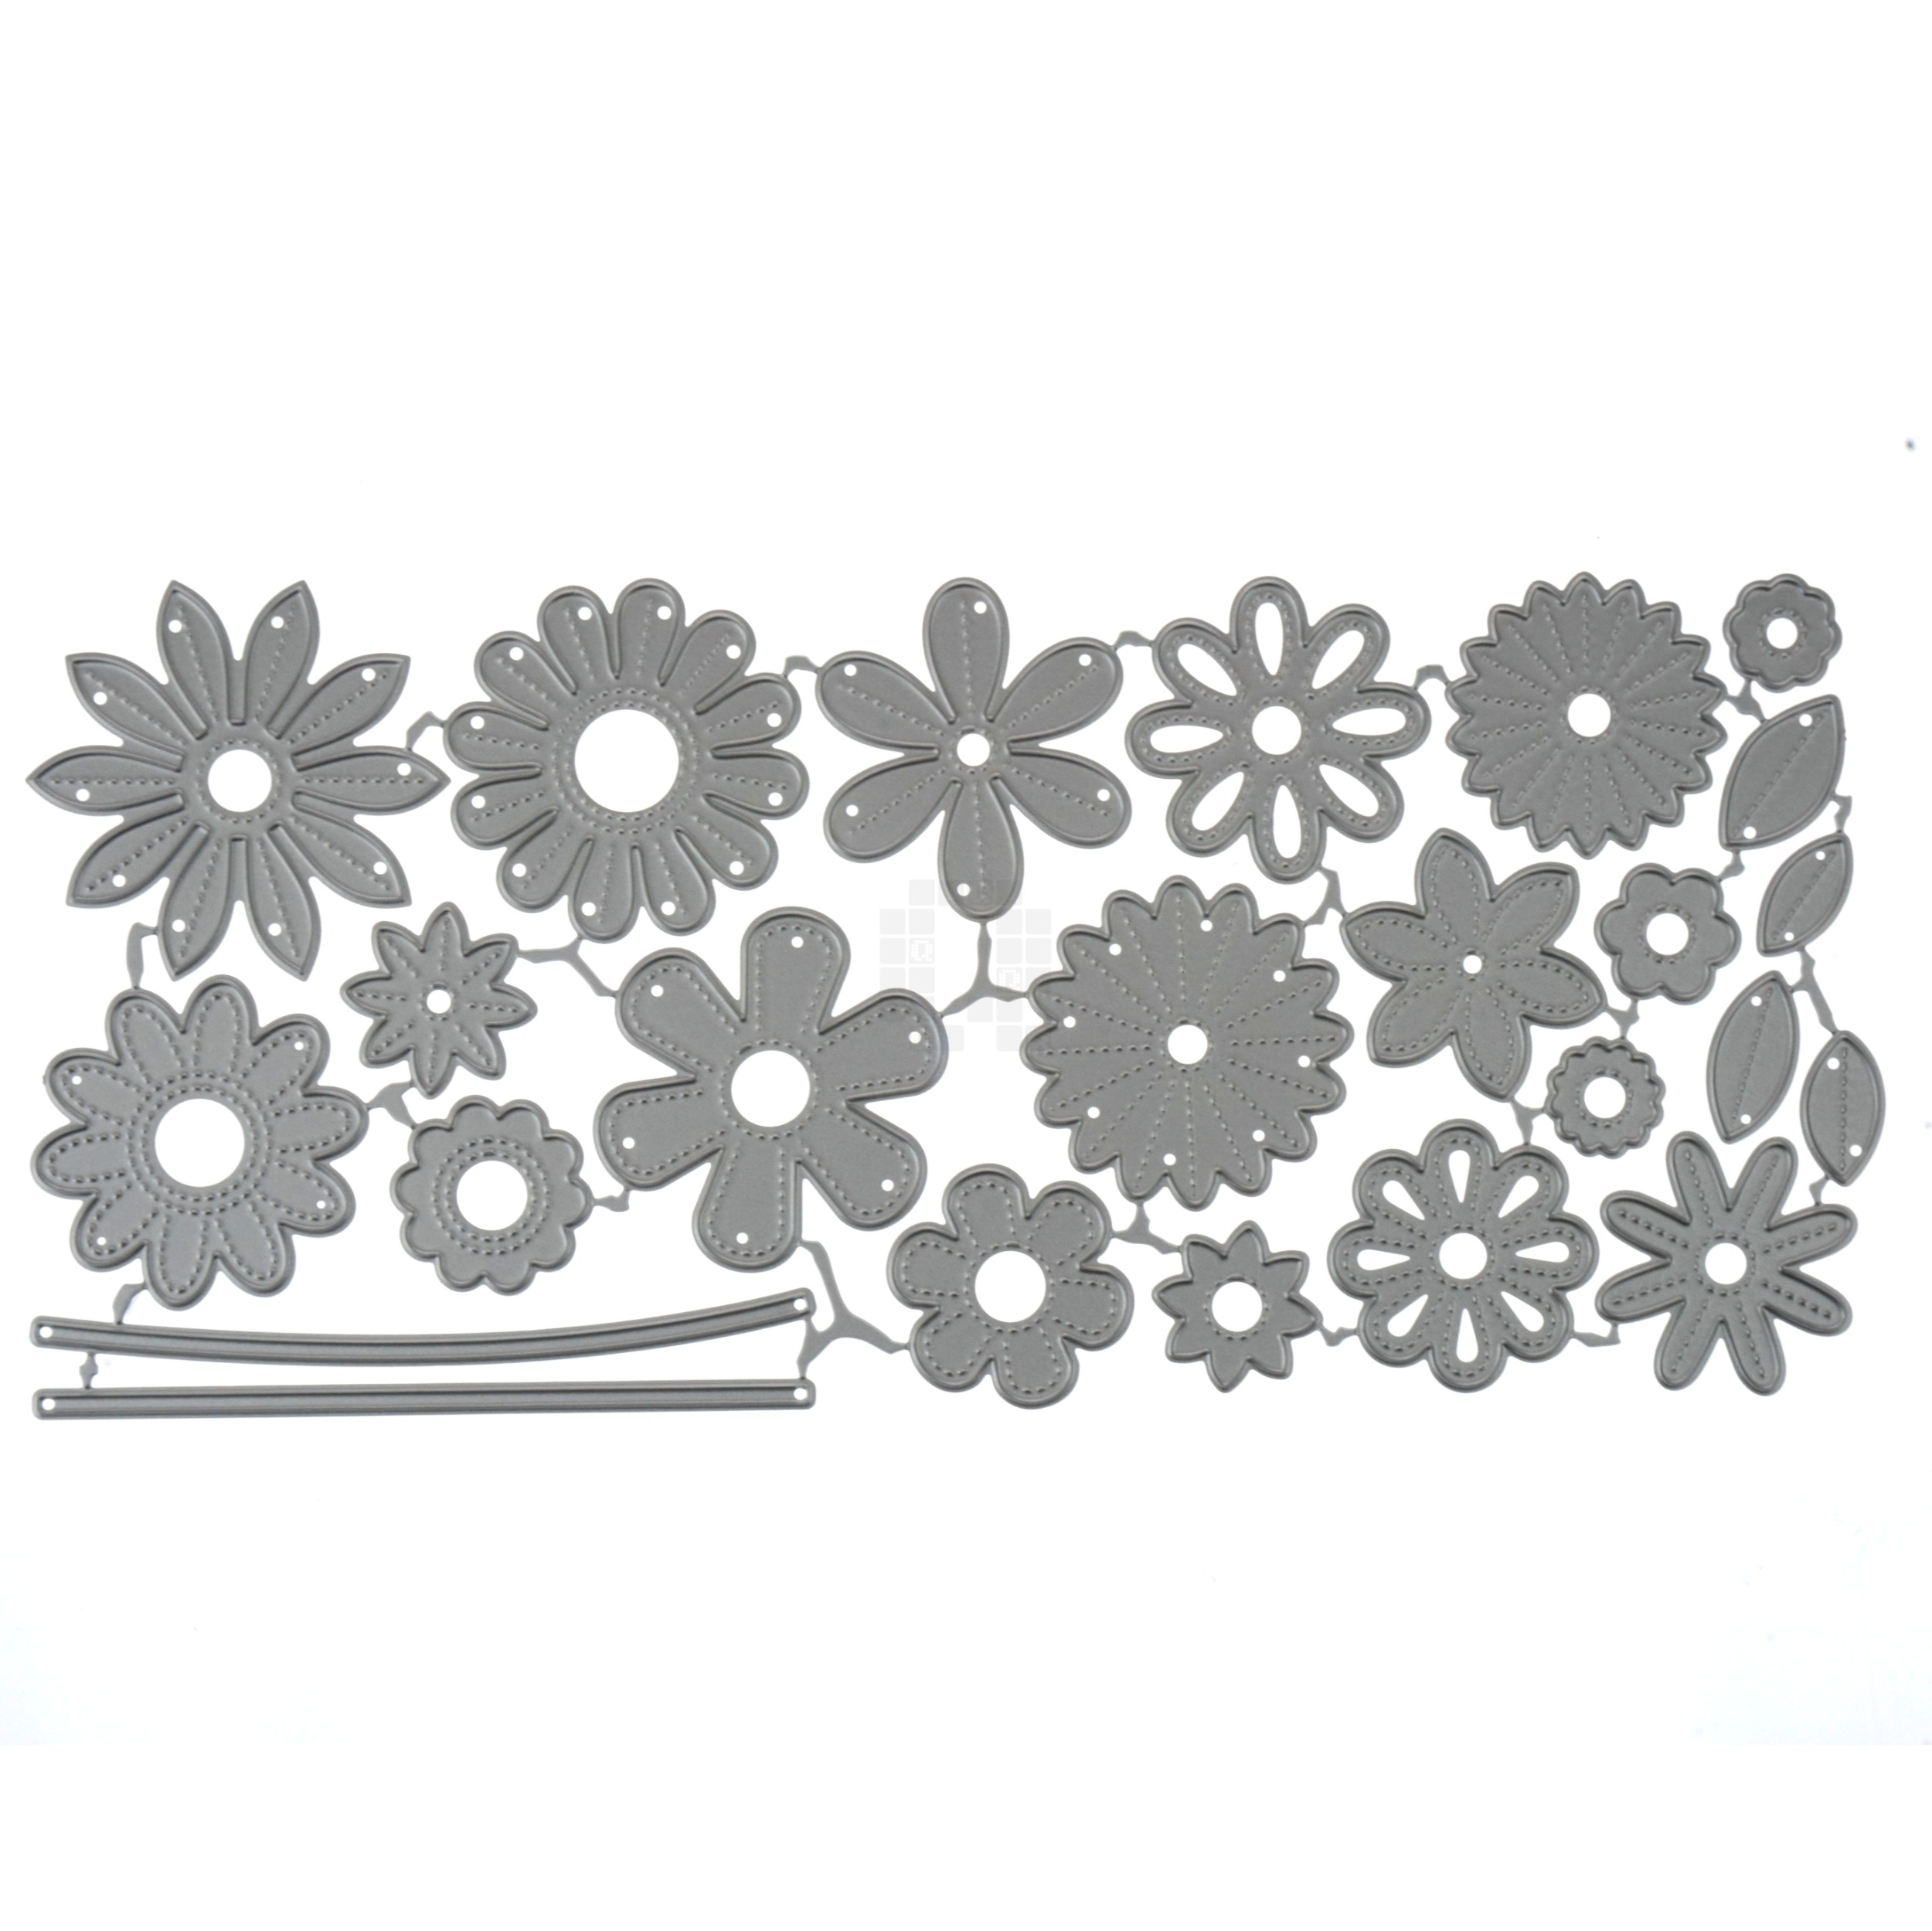 Flowers, Leaves and Stems Metal Cutting Die Set, 24 Pieces